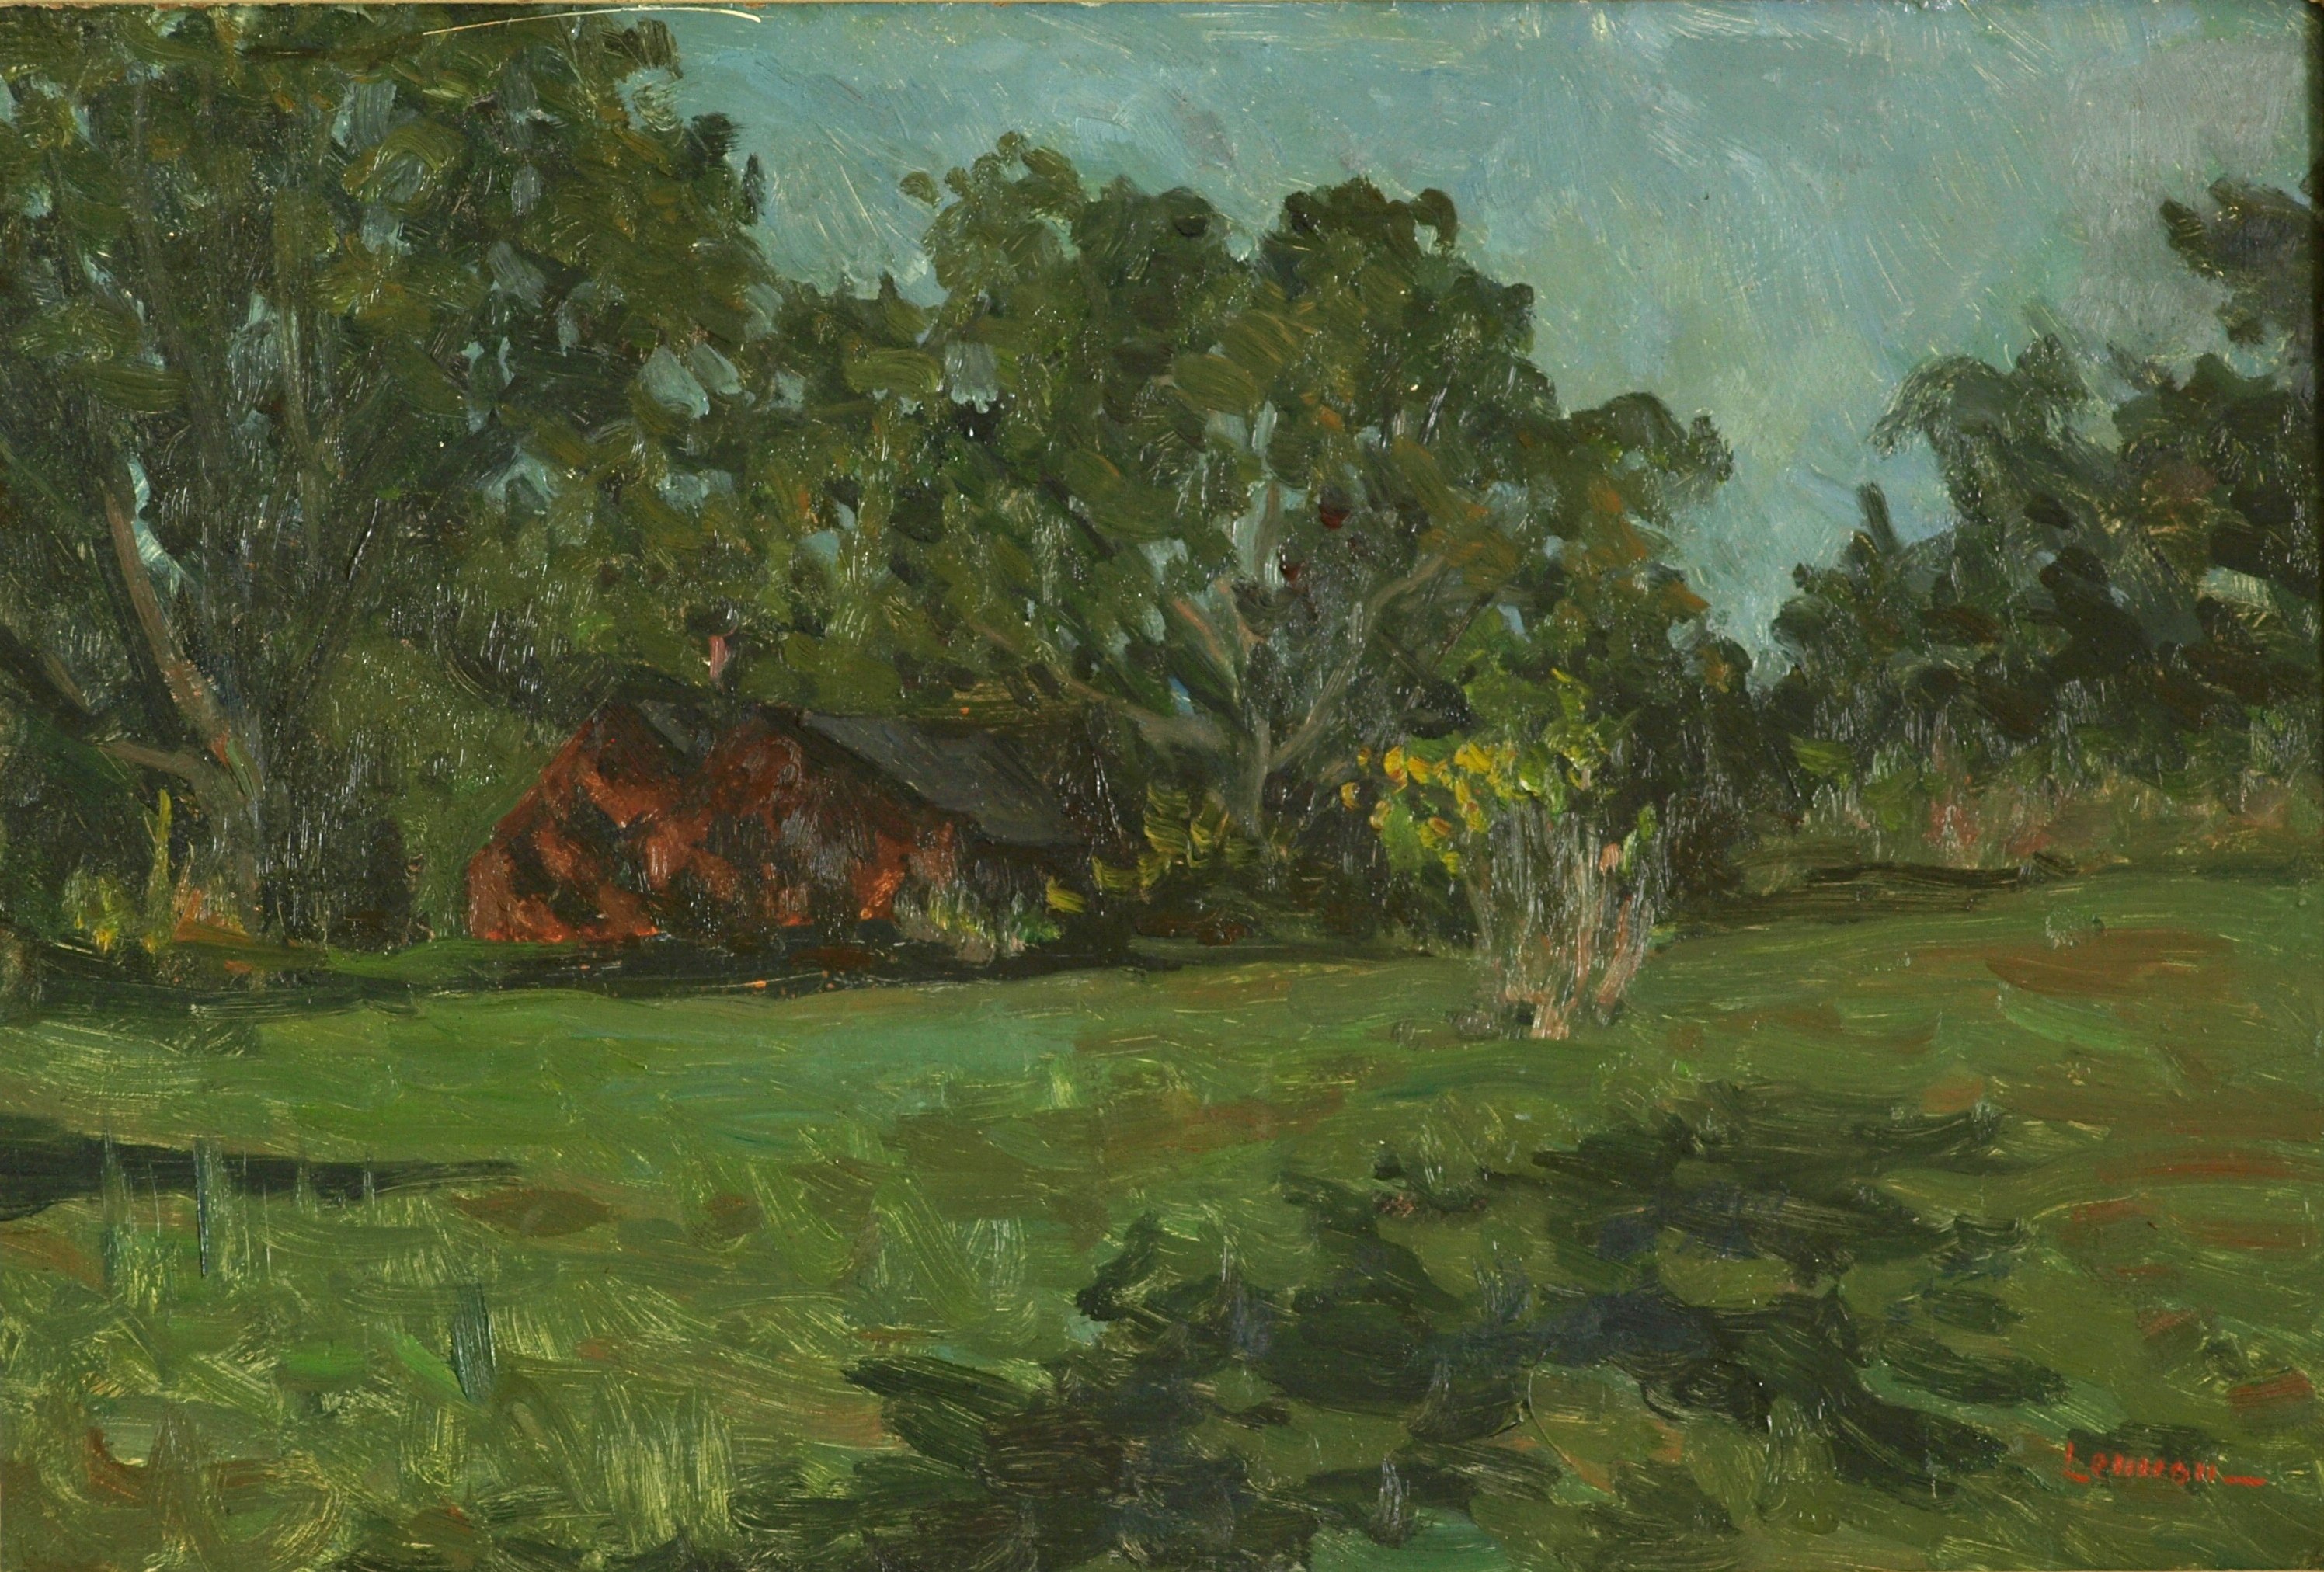 New England Summer, Oil on Panel, 16 x 24 Inches, by Bernard Lennon, $675